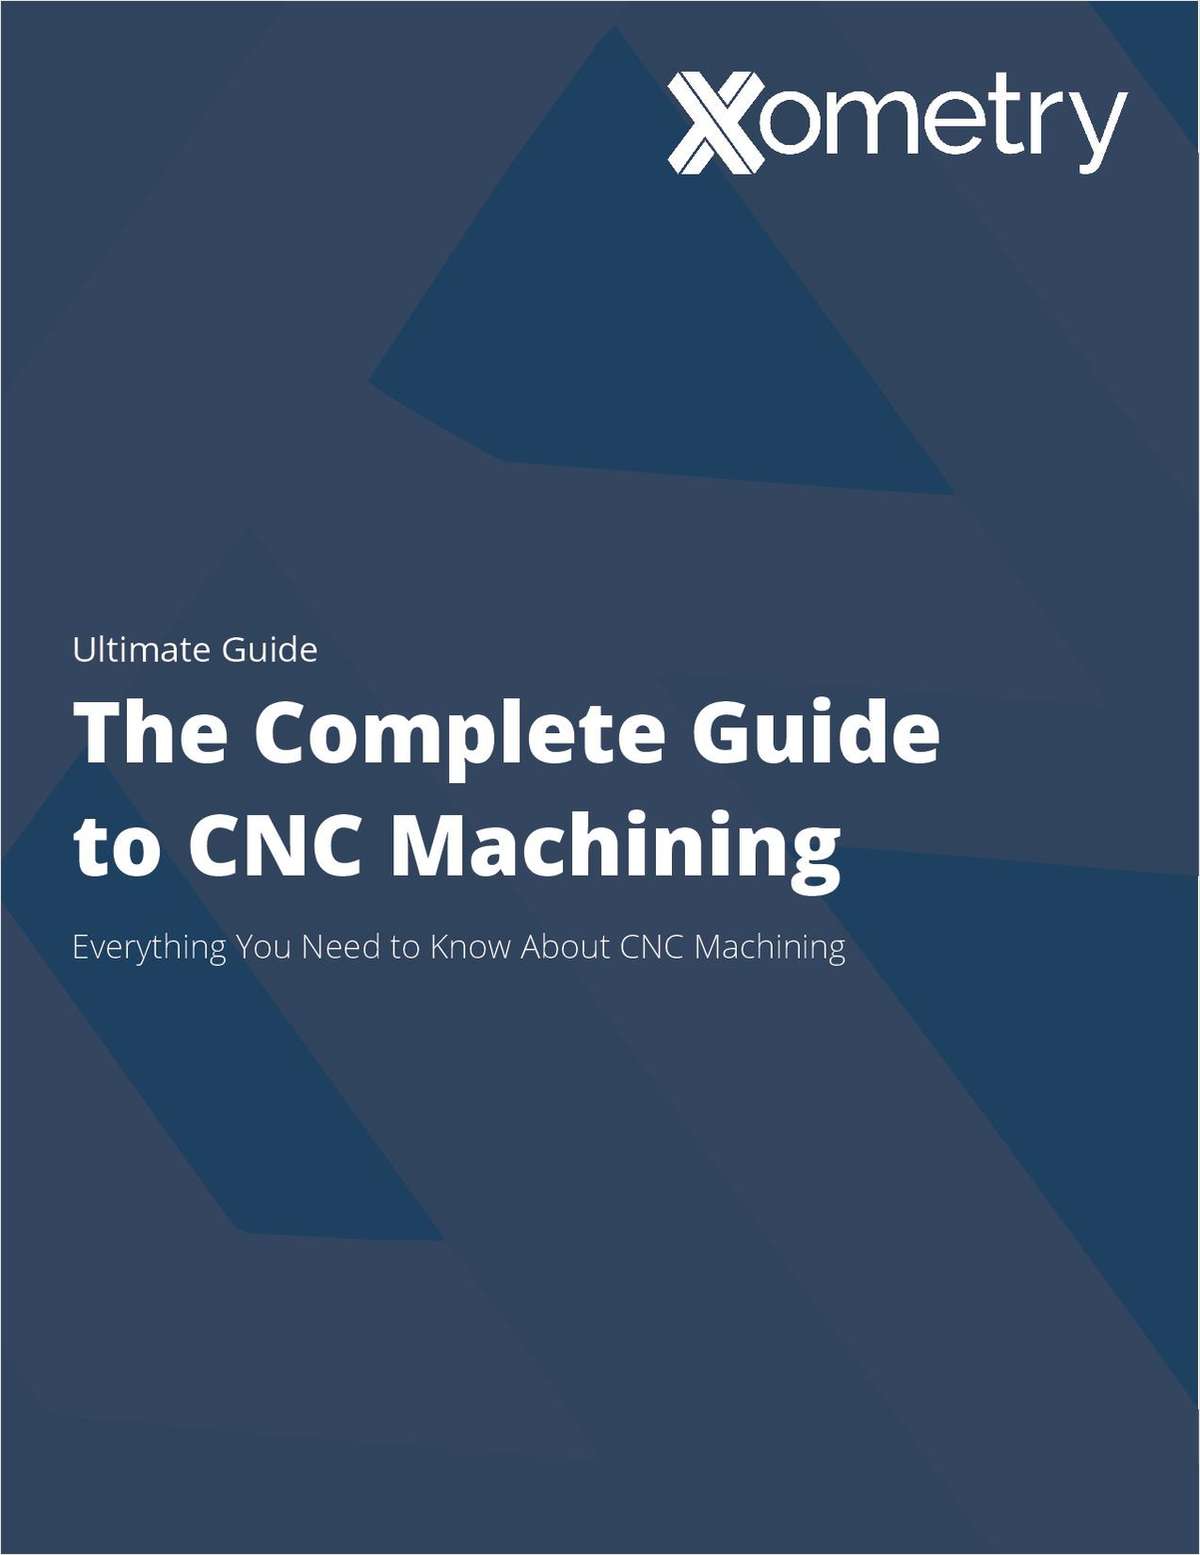 The Complete Guide to CNC Machining